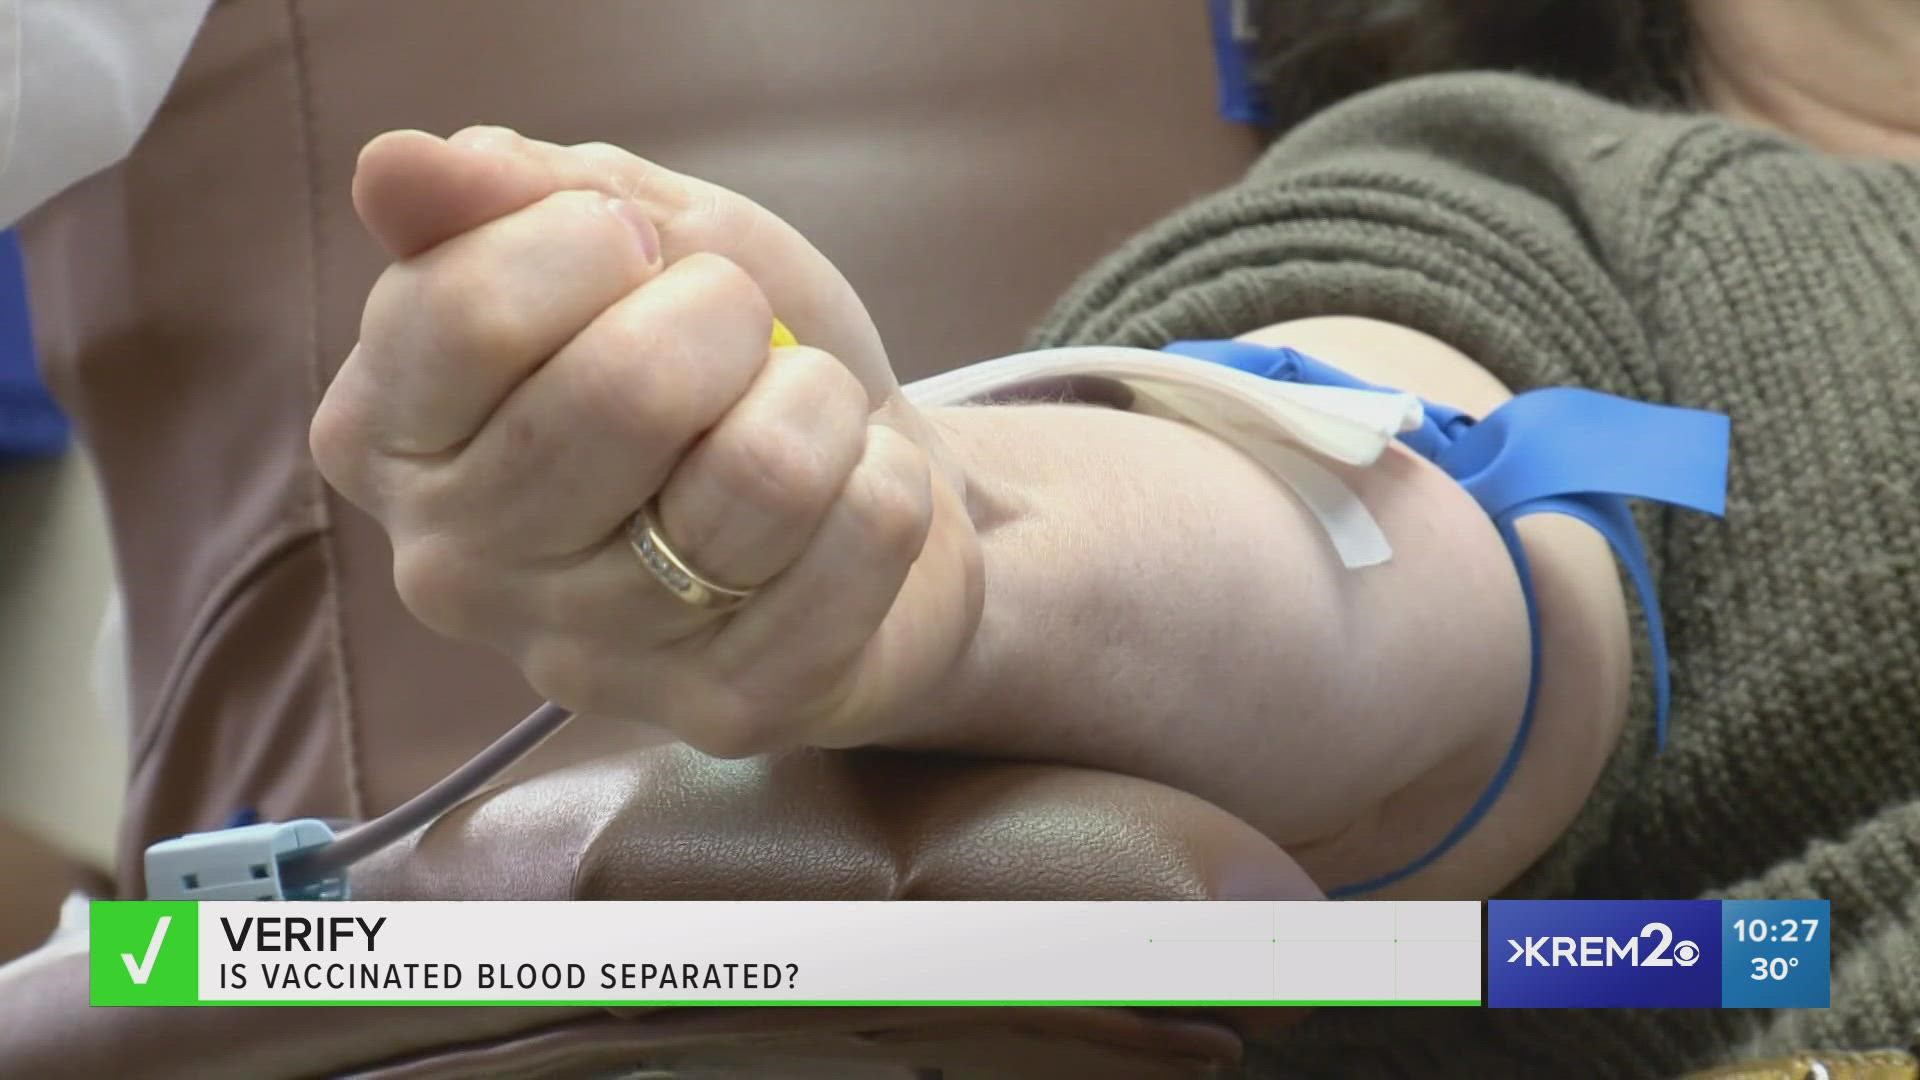 VERIFY's Ariane Datil explains why blood donation centers cannot sort blood by vaccination status.